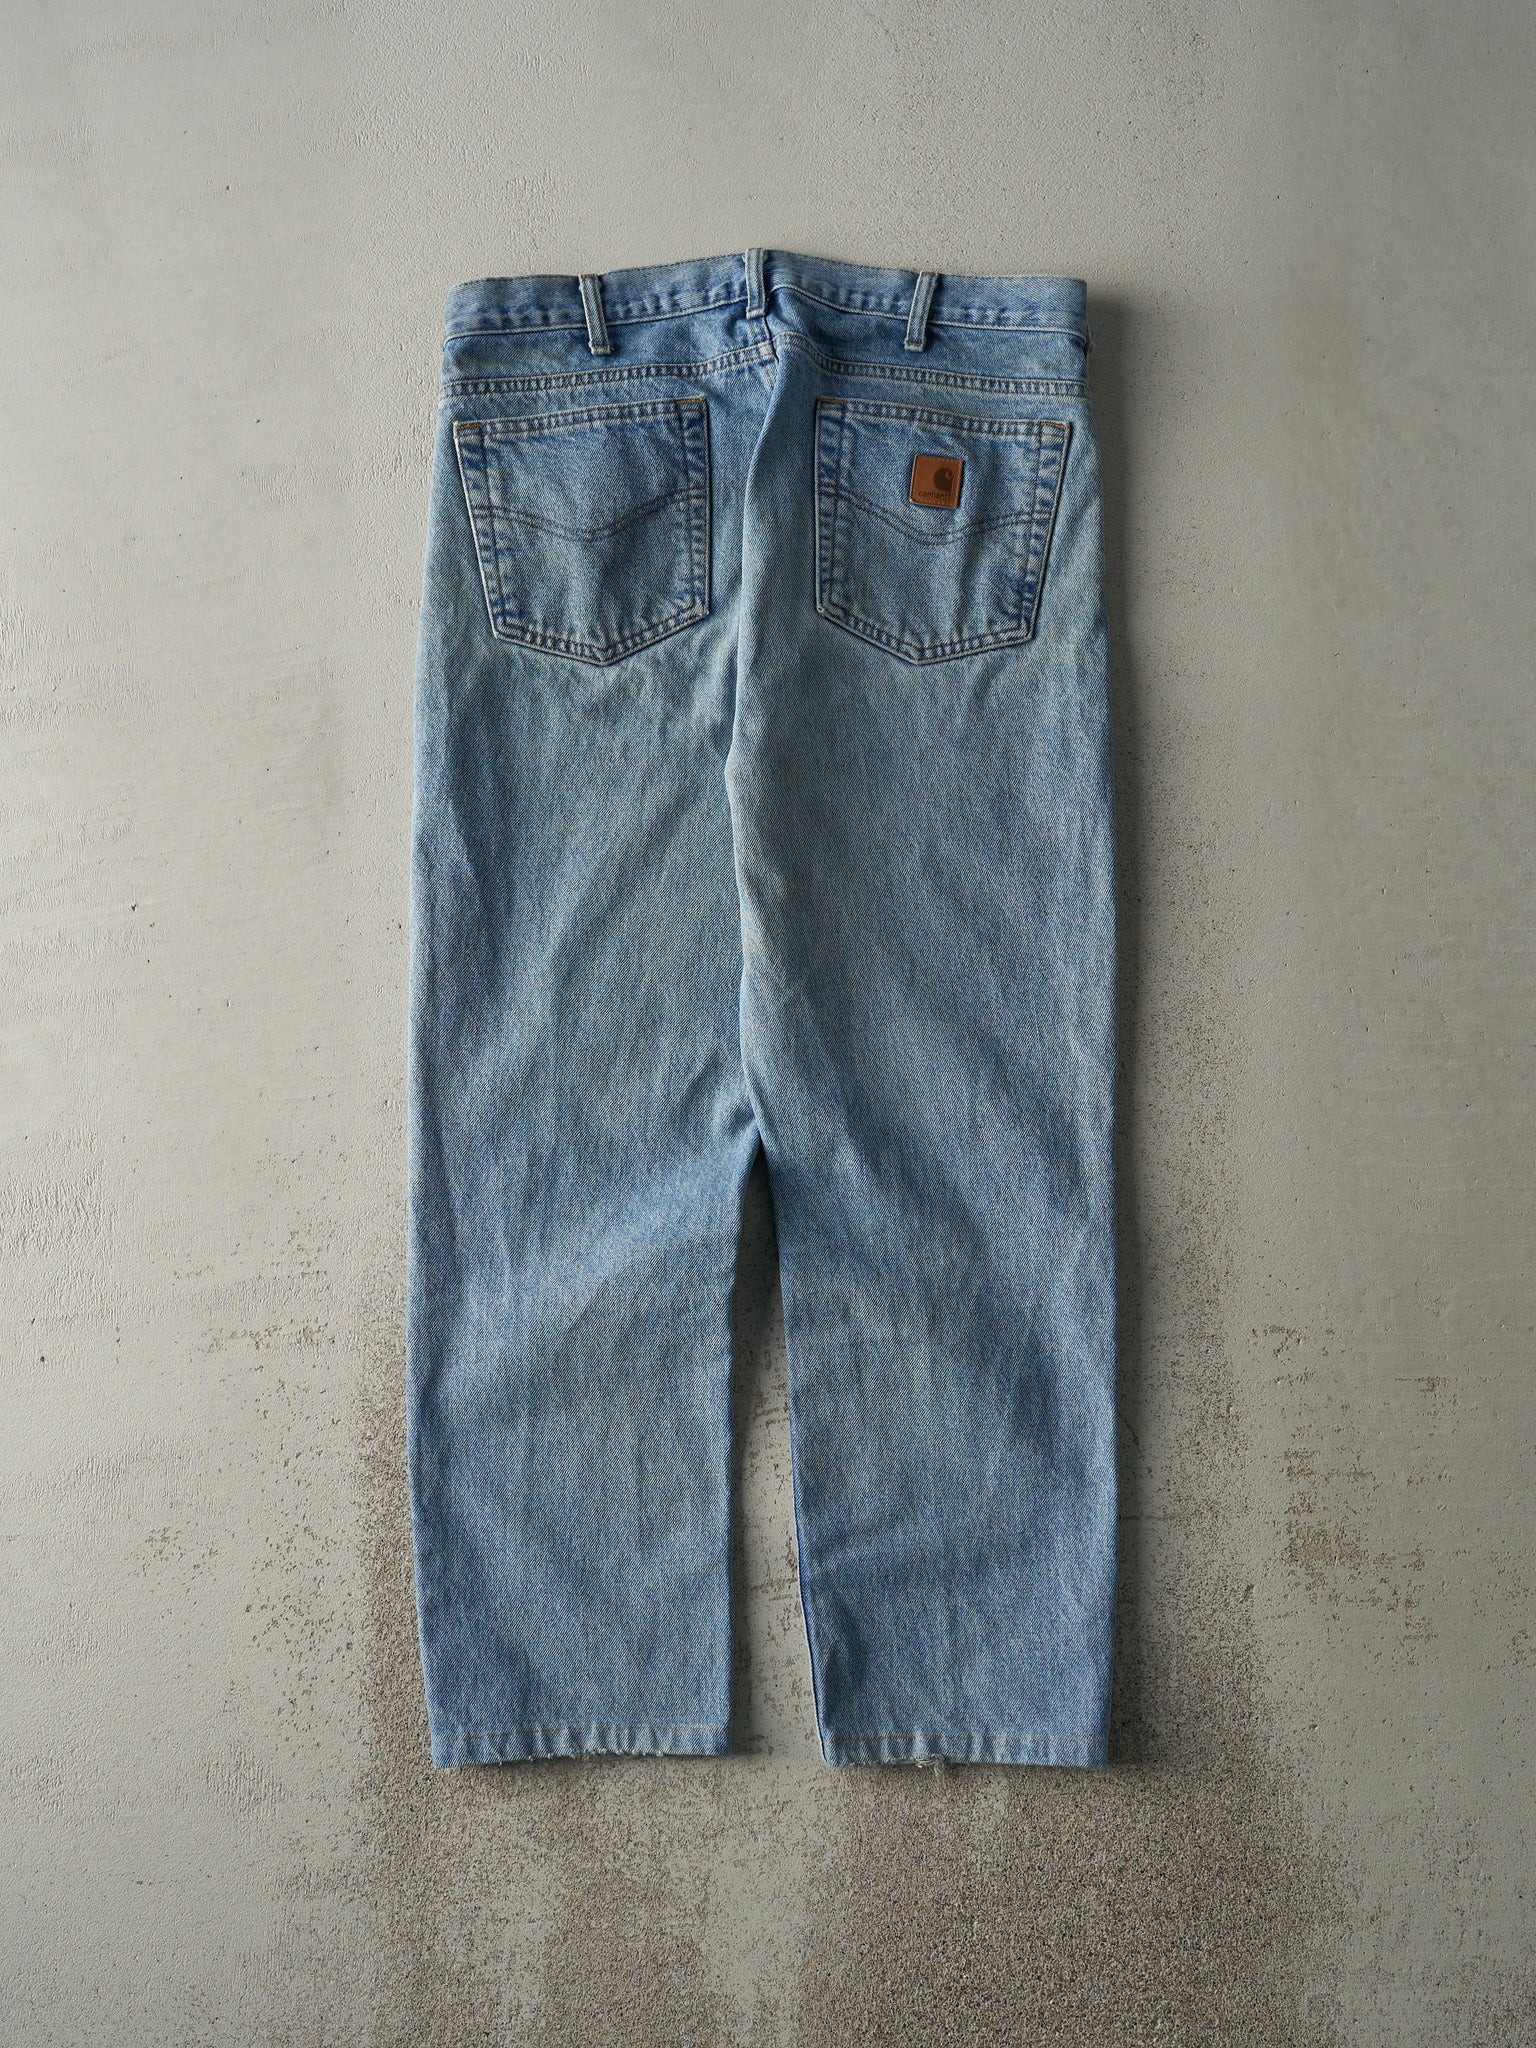 Vintage 90s Light Wash Carhartt Traditional Fit Jeans (34x28.5)